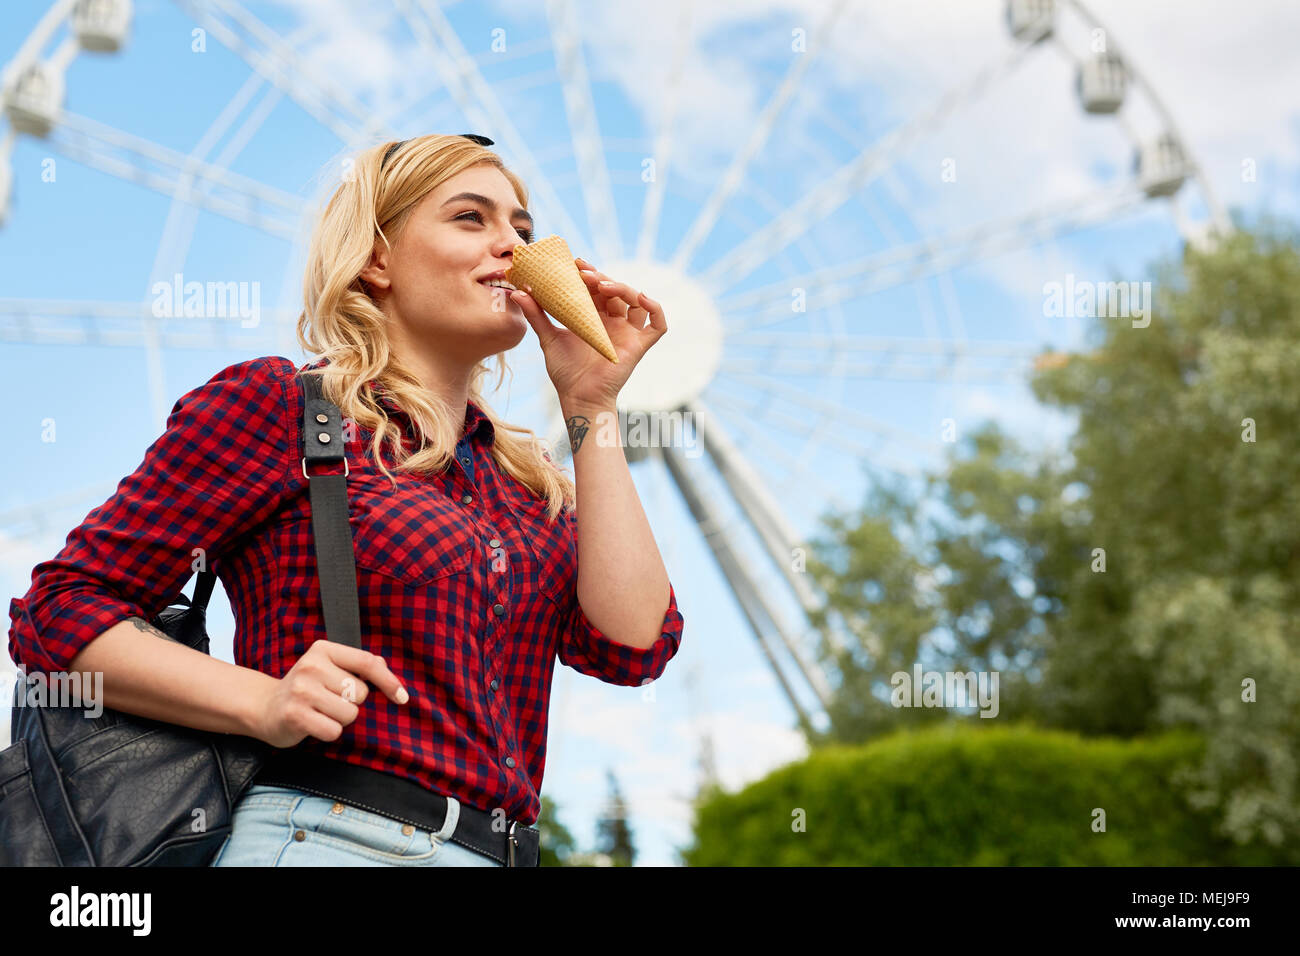 Weekend in theme park Stock Photo